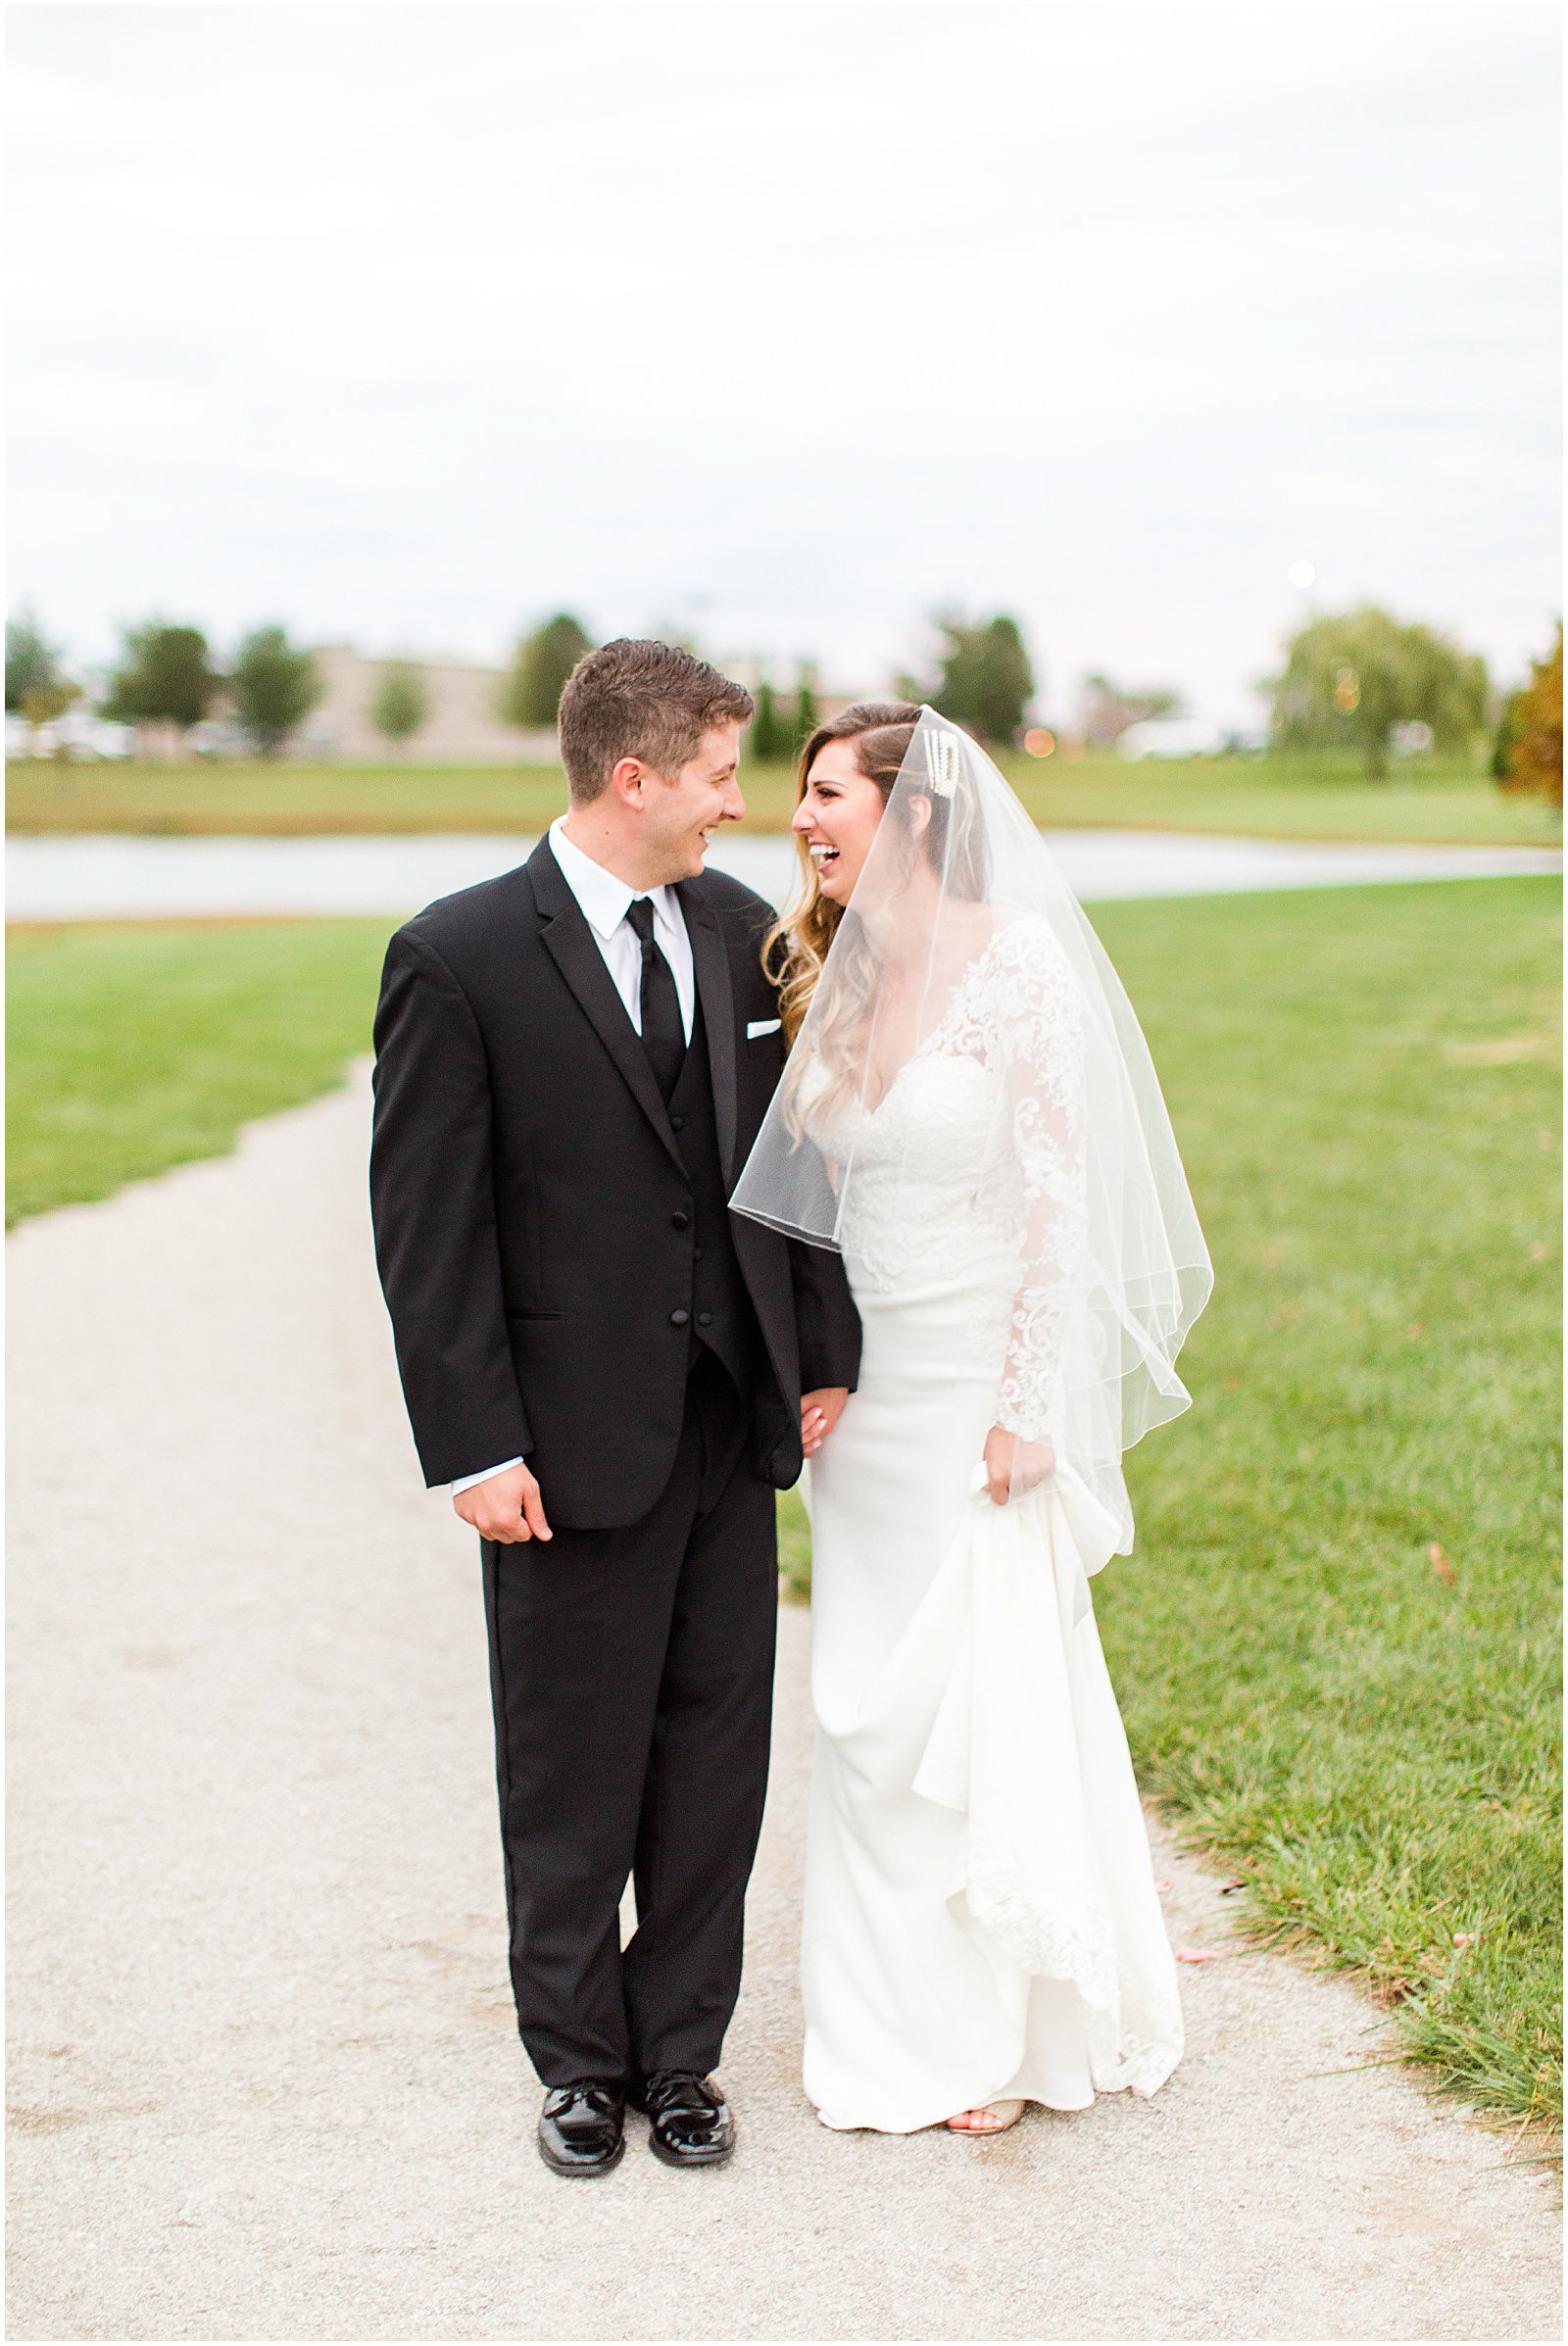 A Romantic Fall Wedding in Ferdinand, IN | Tori and Kyle | Bret and Brandie Photography 0144.jpg